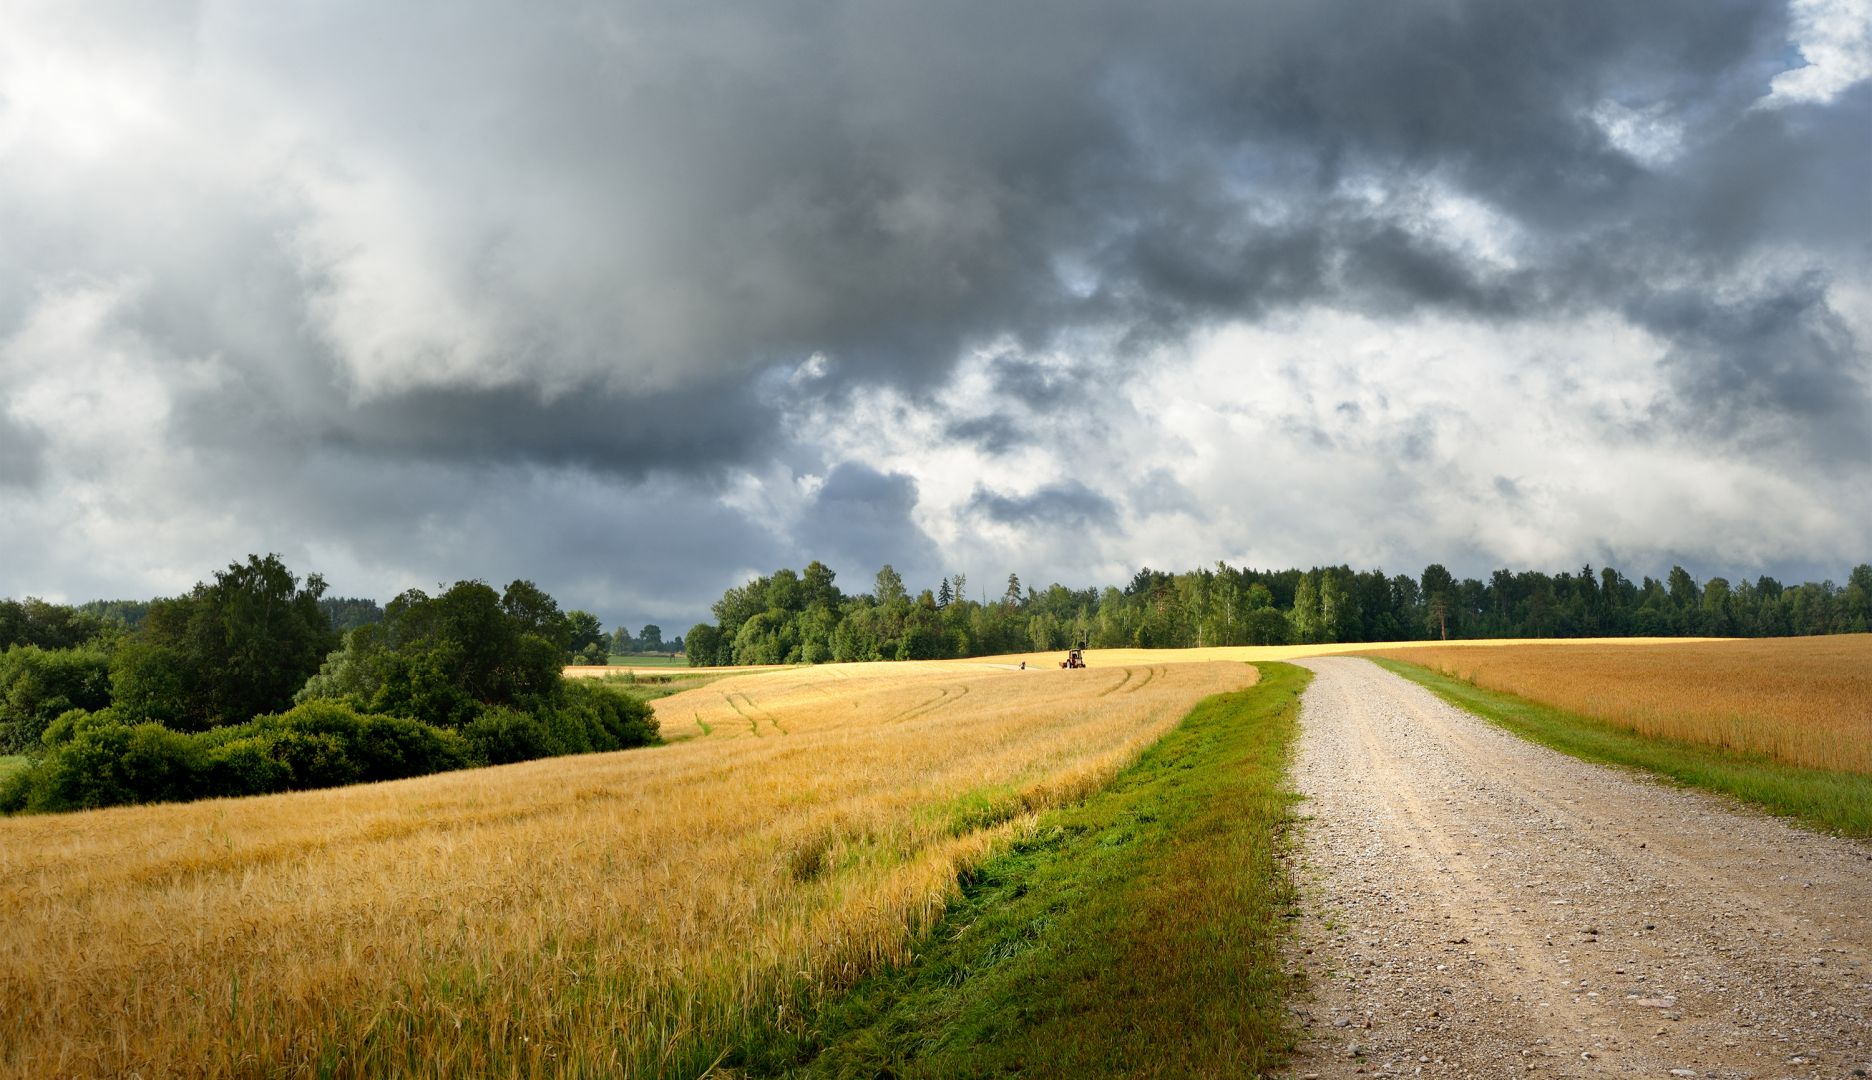 Storm clouds forming over farm field during harvest